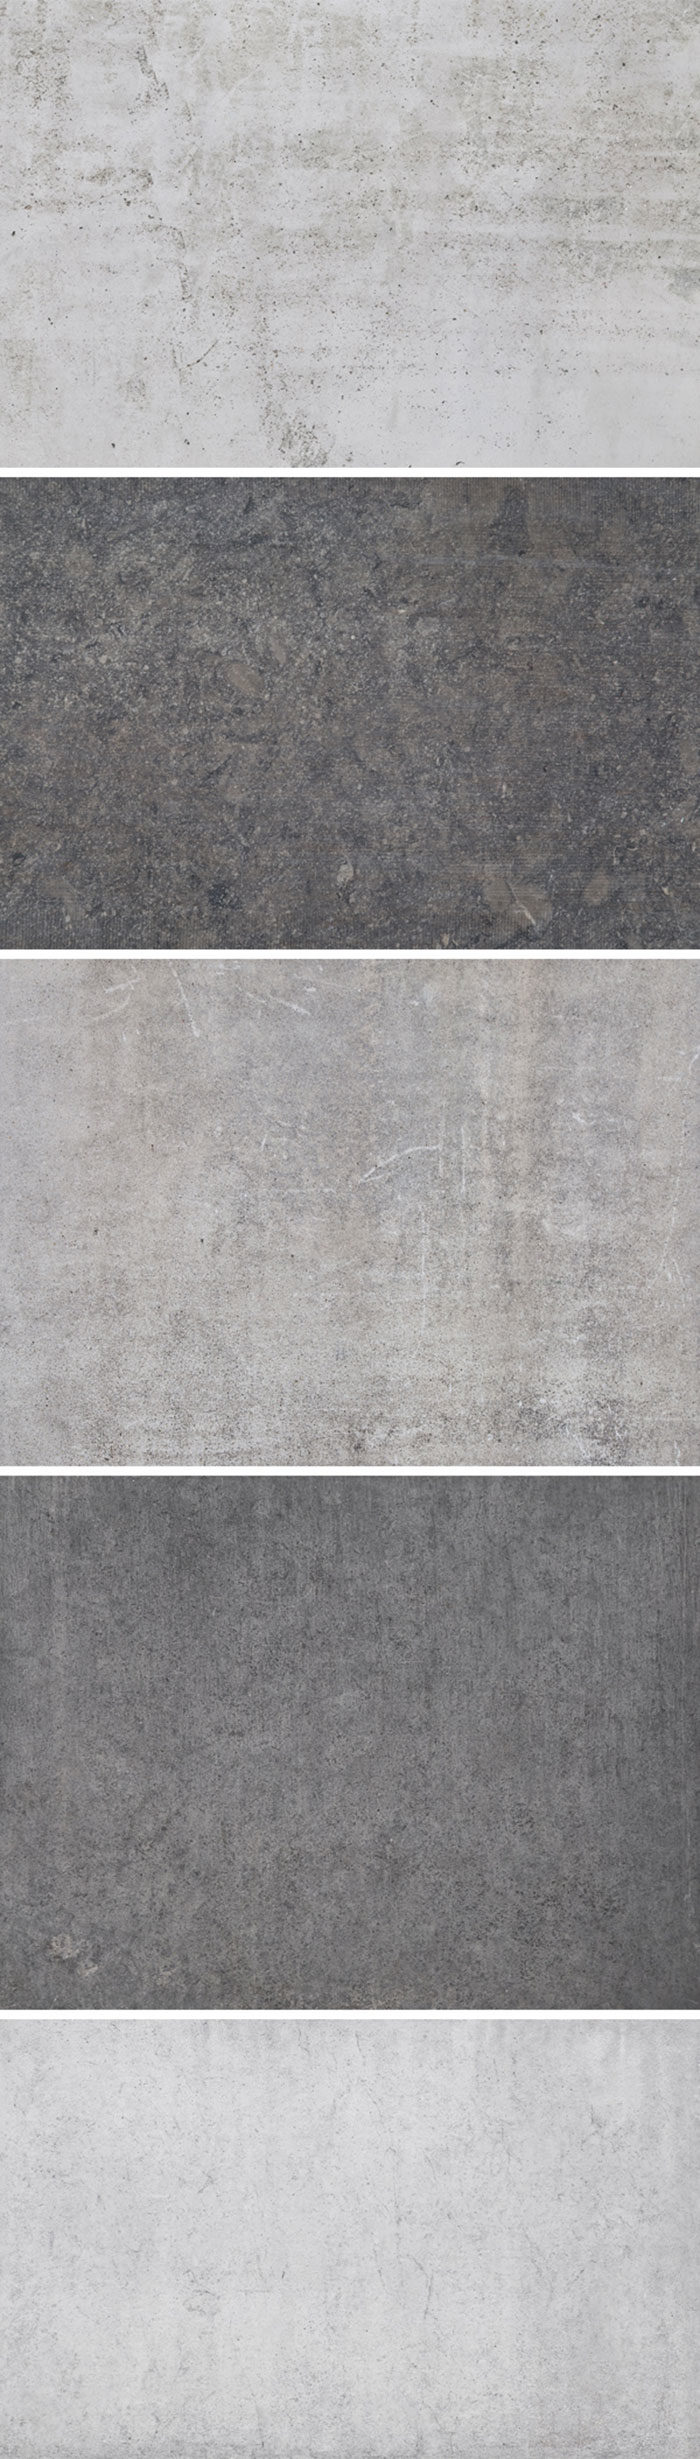 5-Stone-Wall-Textures-Vol2-700x2459 Free concrete texture examples to download